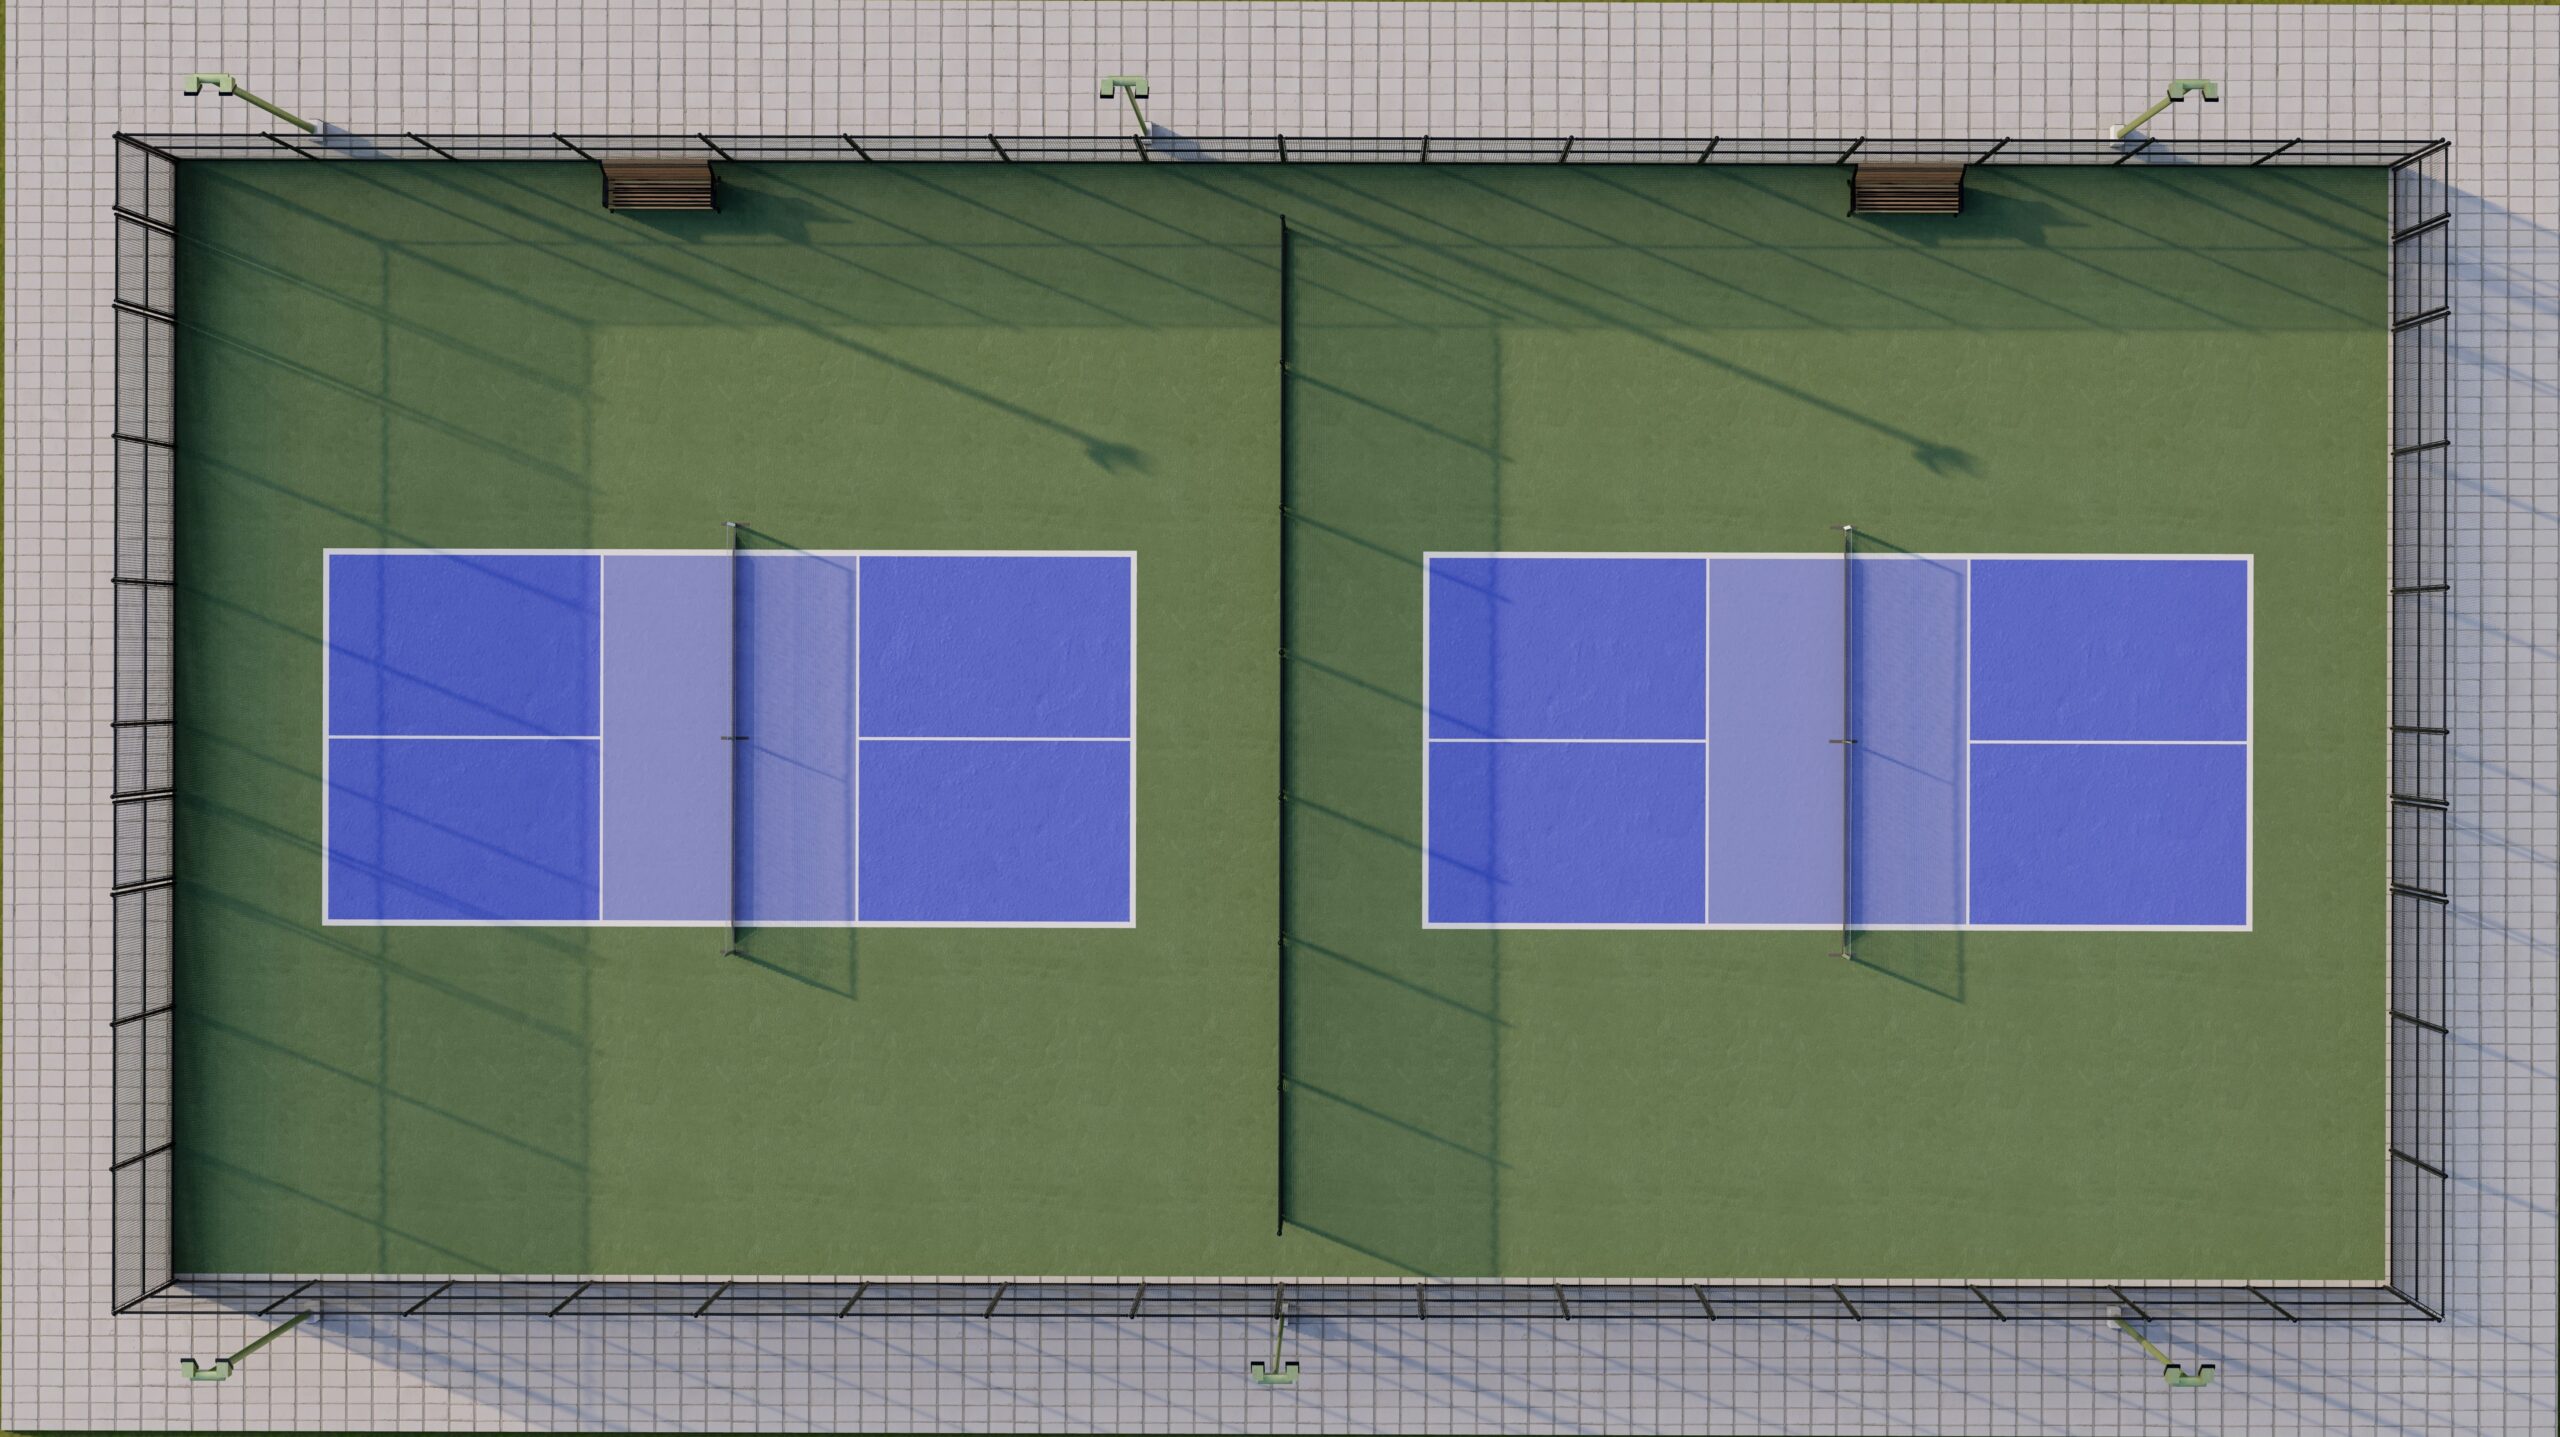 1 tennis courts converted to 1 pickleball courts